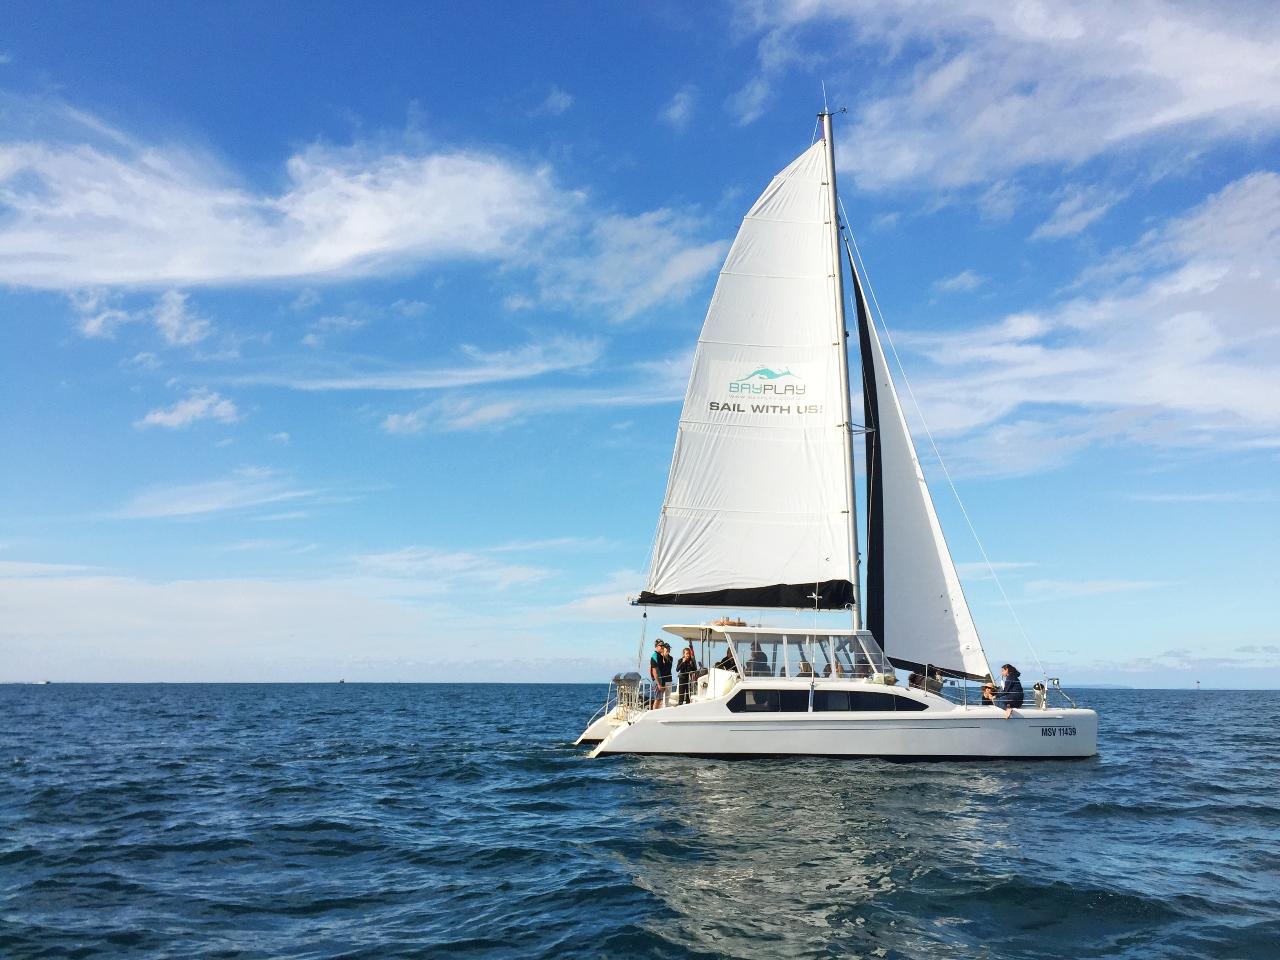 Enjoy the Afternoon Sailing on Port Phillip Bay